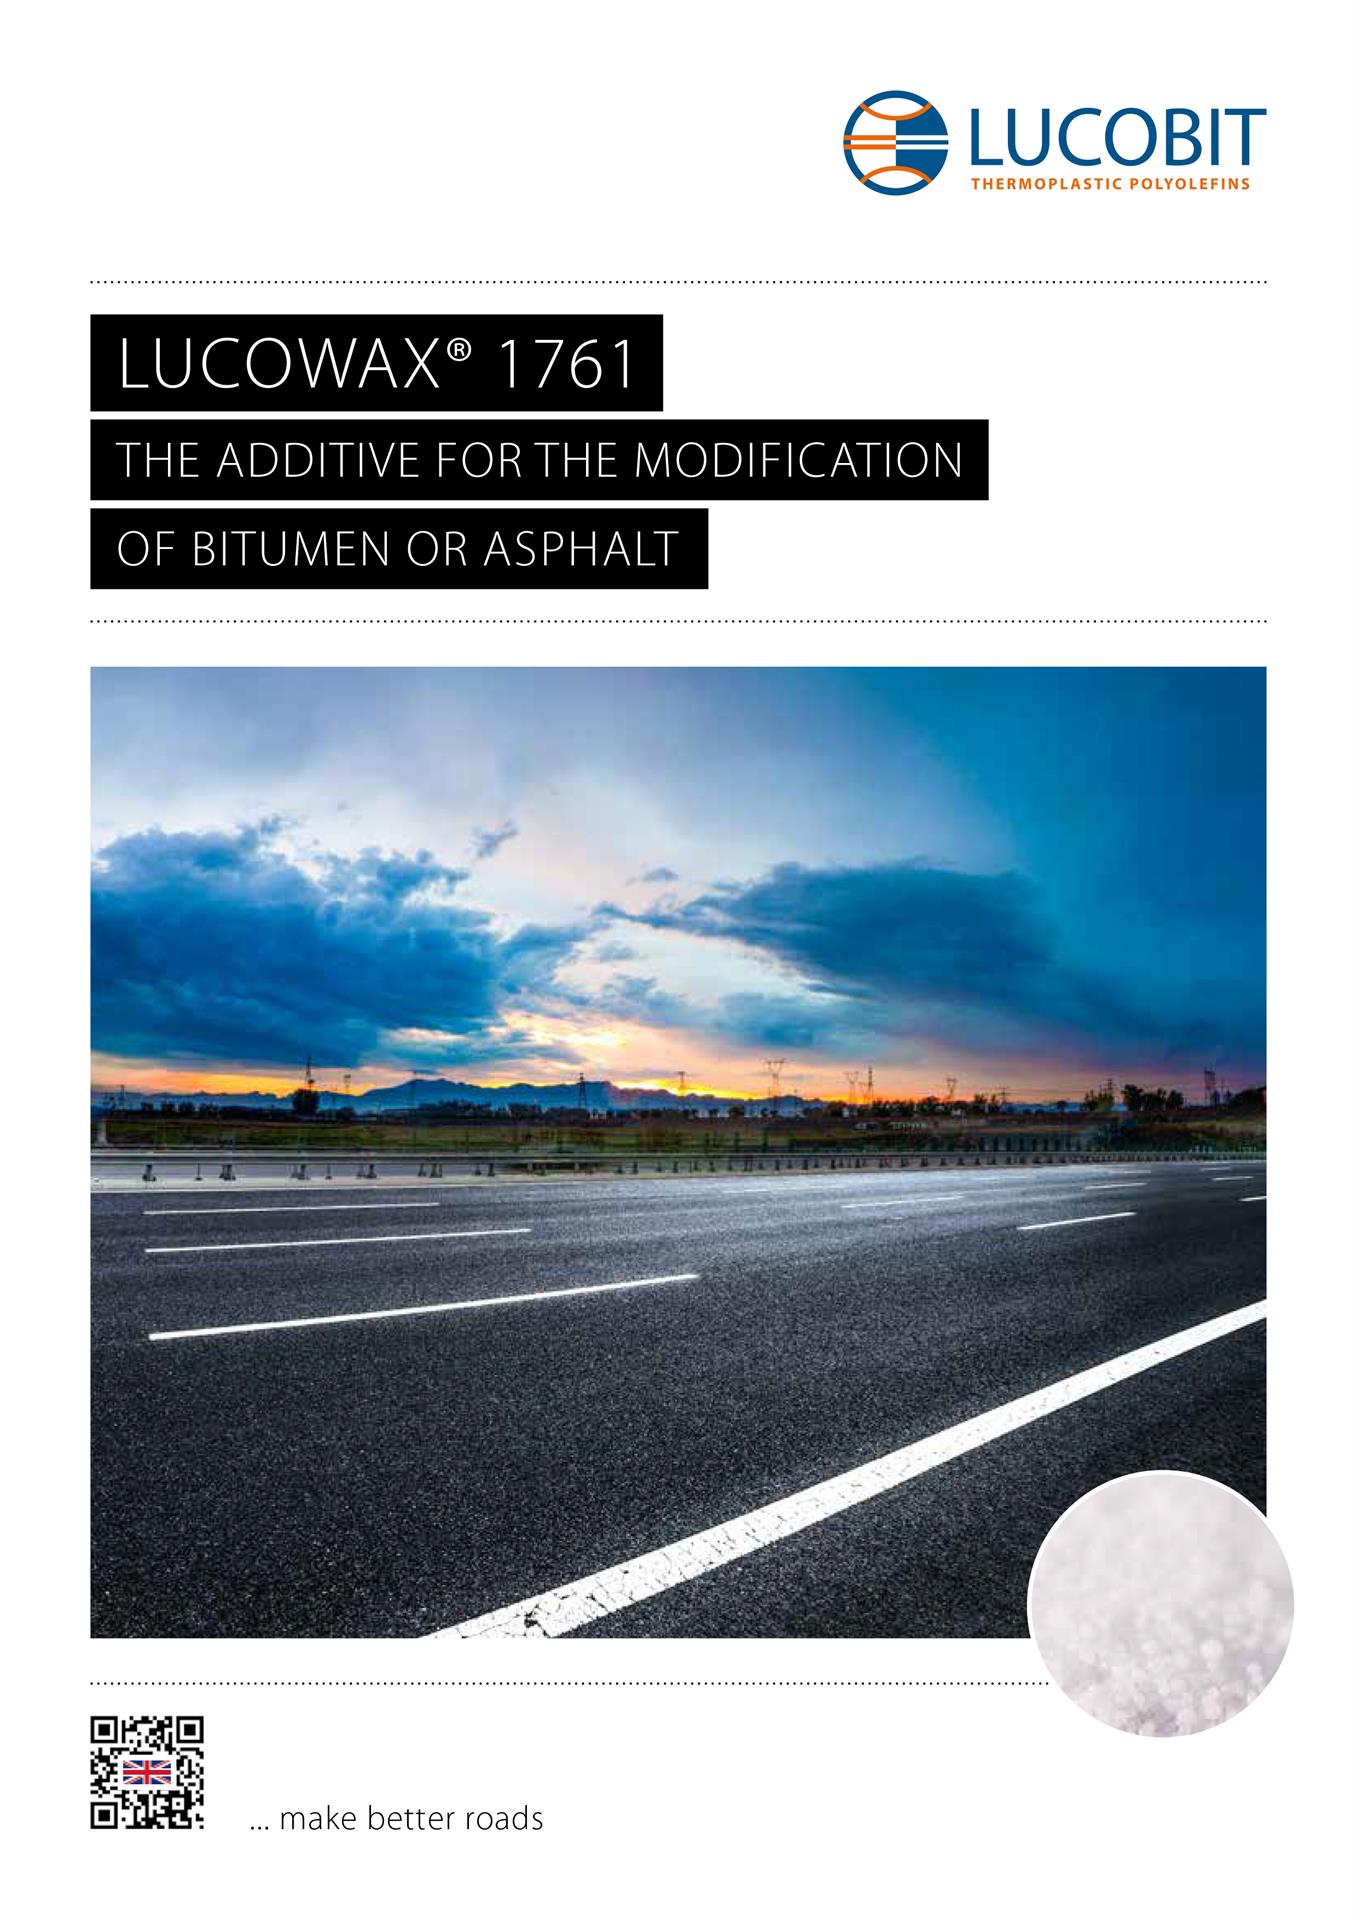 LUCOBIT Broschüre - LUCOWAX 1761 THE ADDITIVE FOR THE MODIFICATION OF BITUMEN OR ASPHALT